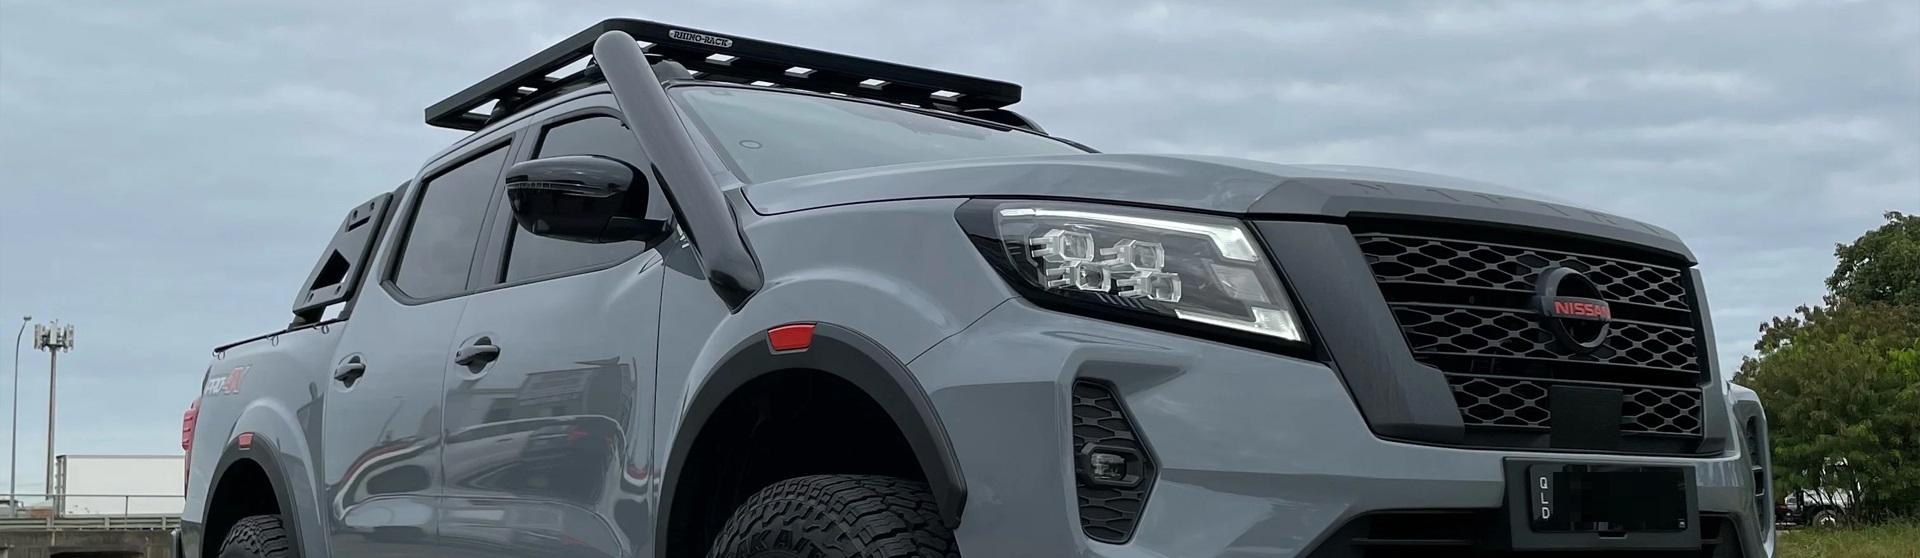 anticipating a refresh of one of Australia's favourite three-row SUV wagons, the Isuzu MU-X, as part of the Japanese off-road and commercial vehicle specialists' often-annual improvement cycle.